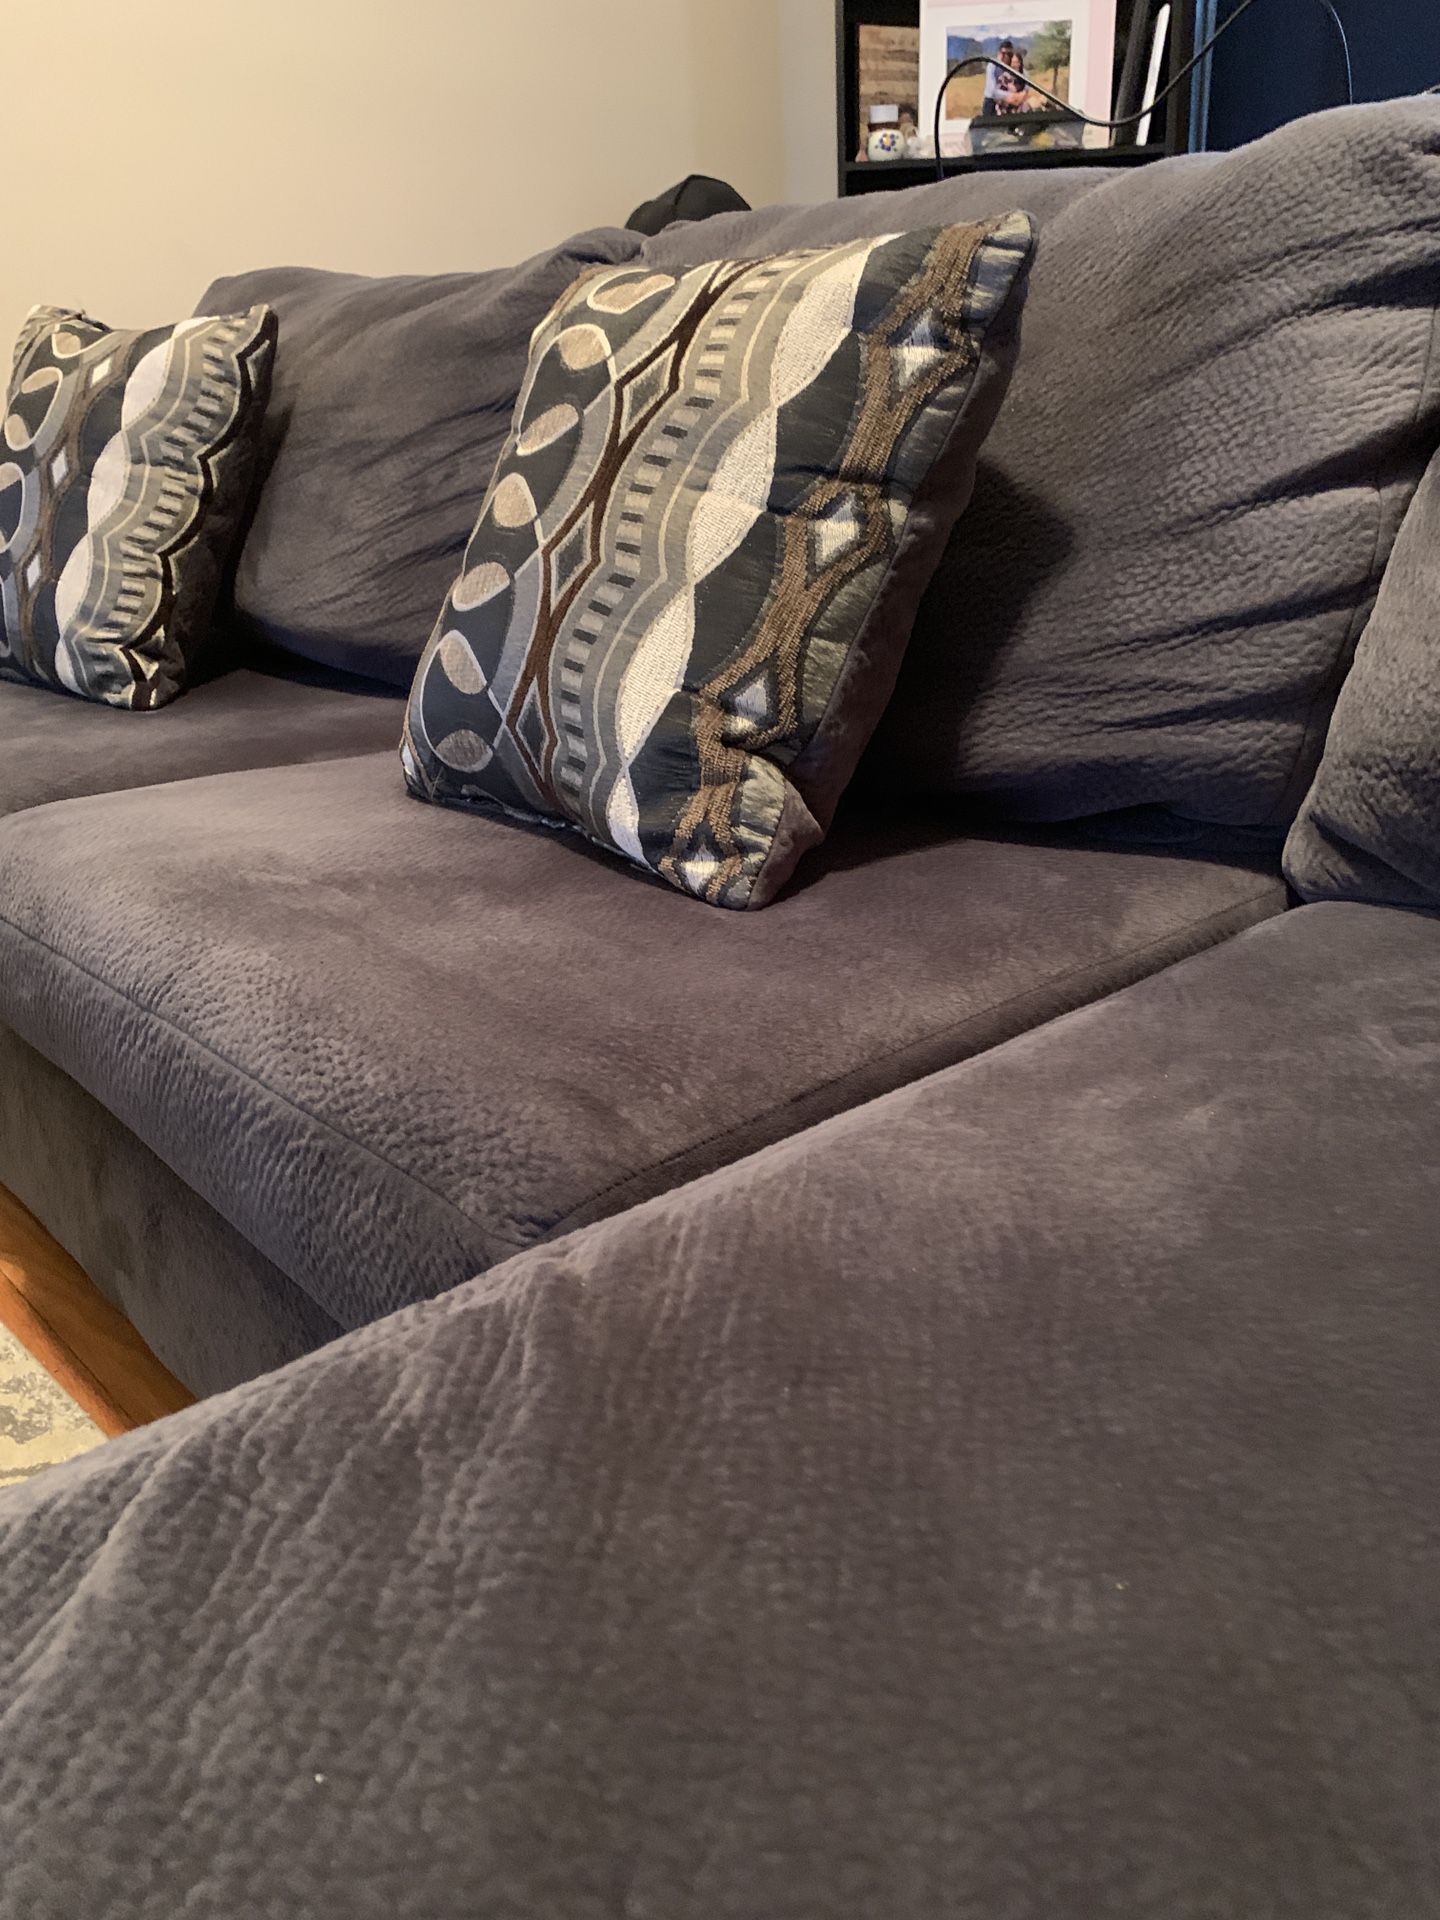 Cloud-like comfortable: 2-Piece Couch Sectional!